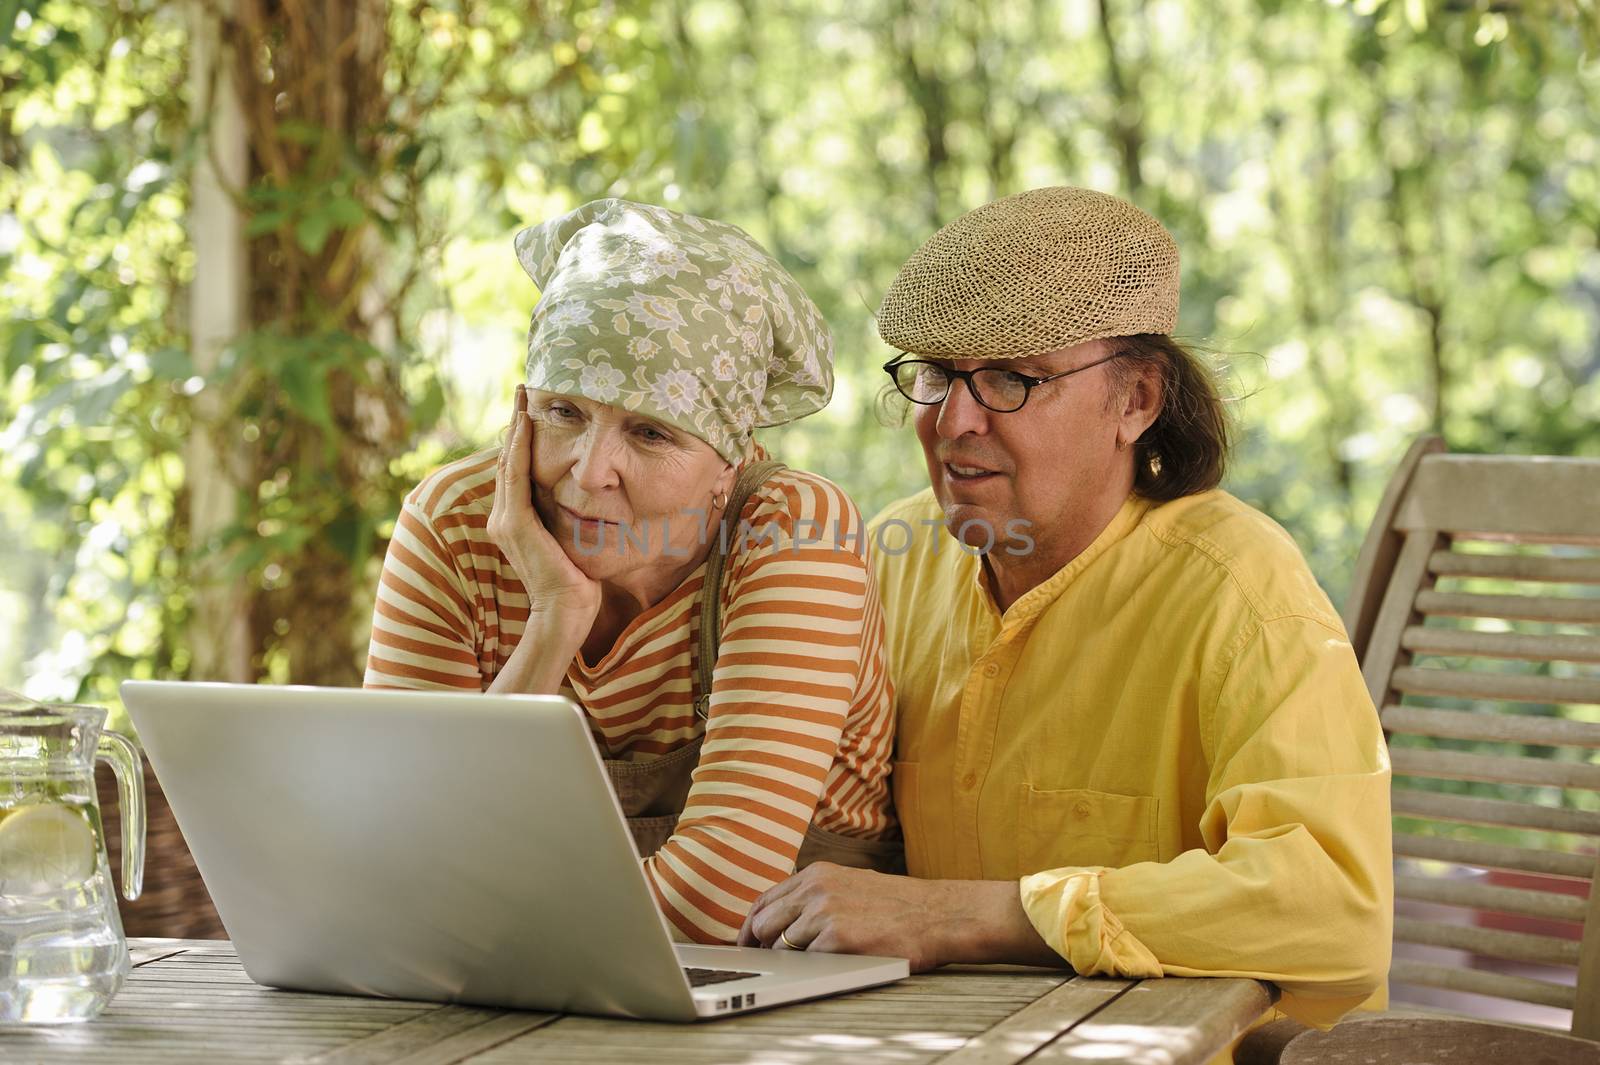 Senior couple outdoors with a laptop, They're looking at the computer. There's a sunny background of trees and bushes